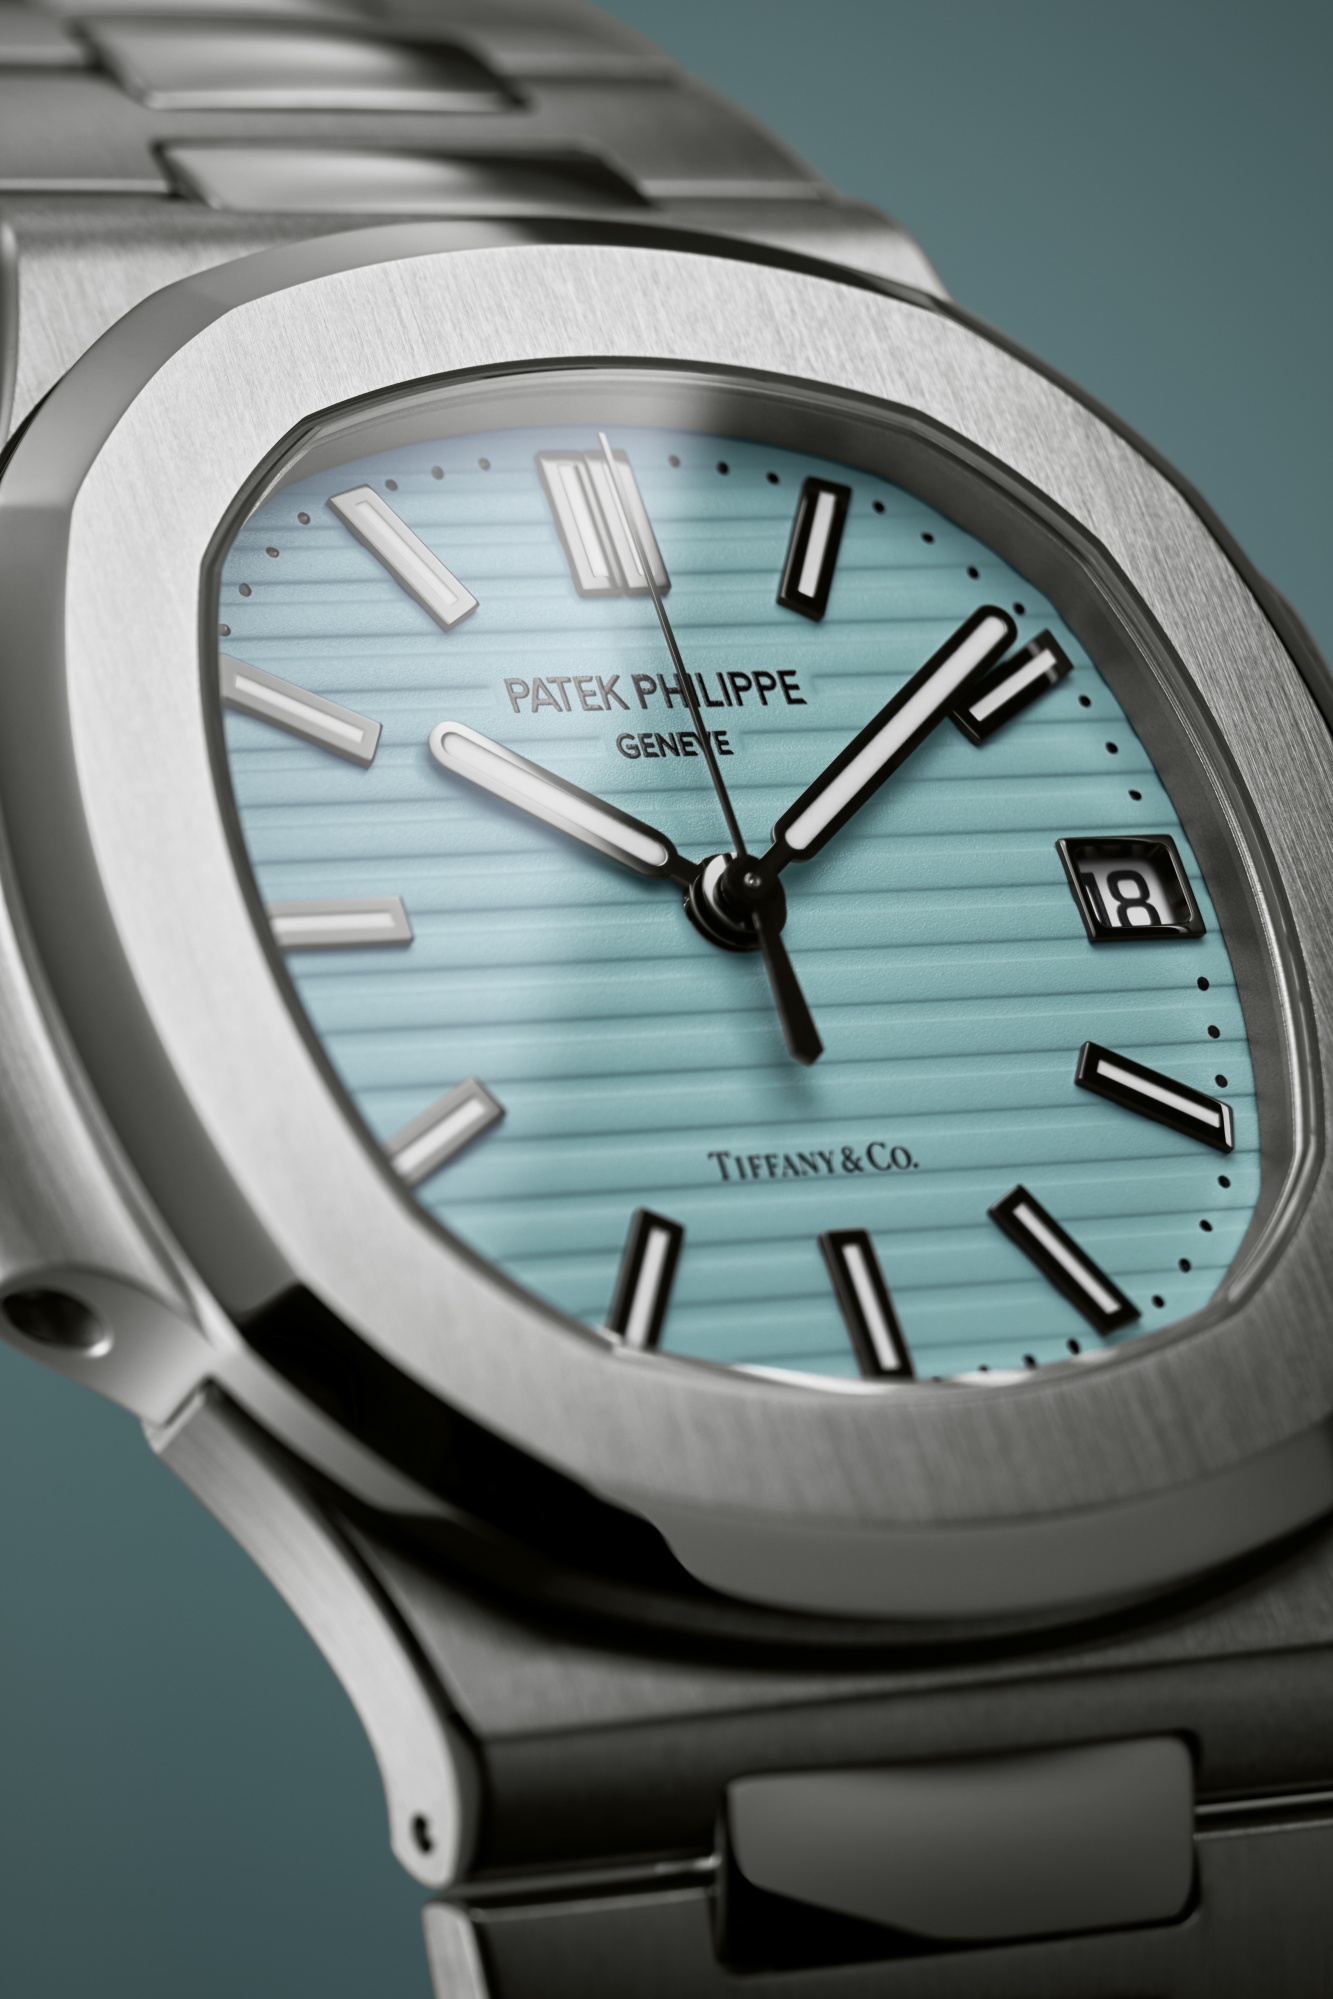 Patek Philippe's Nautilus Watch Returns in Tiffany Blue - The New York Times